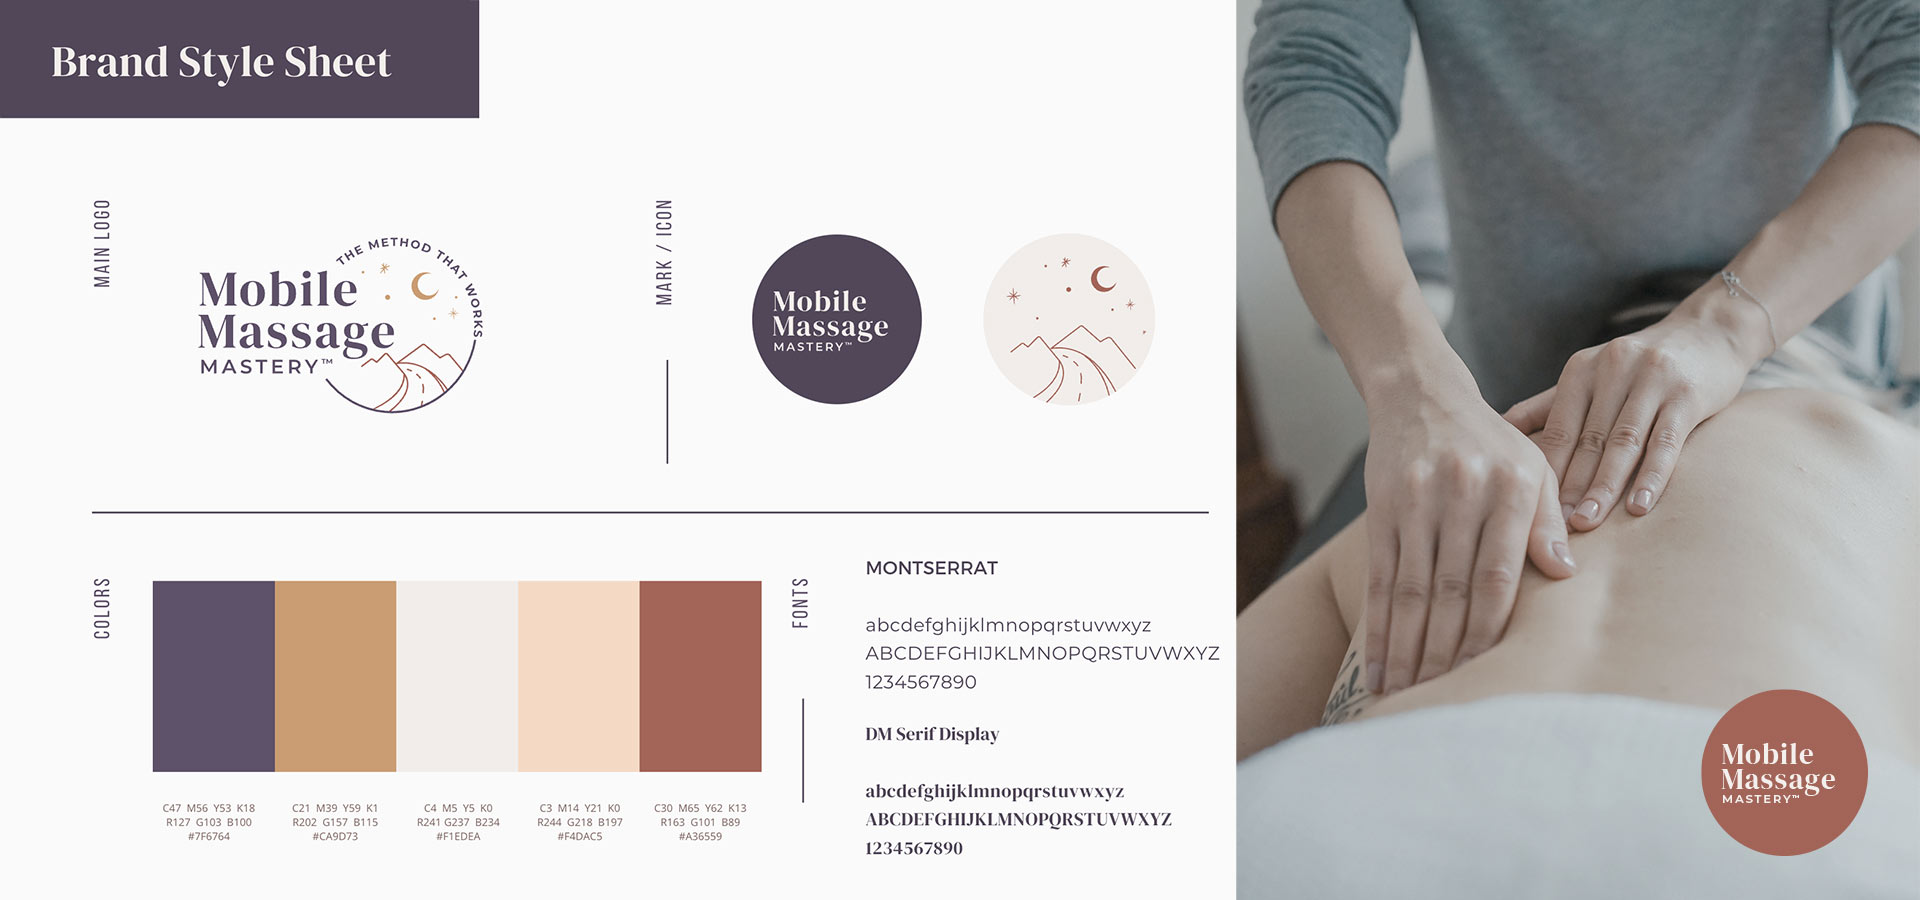 Brand Style Guide Mobile Massage Mastery